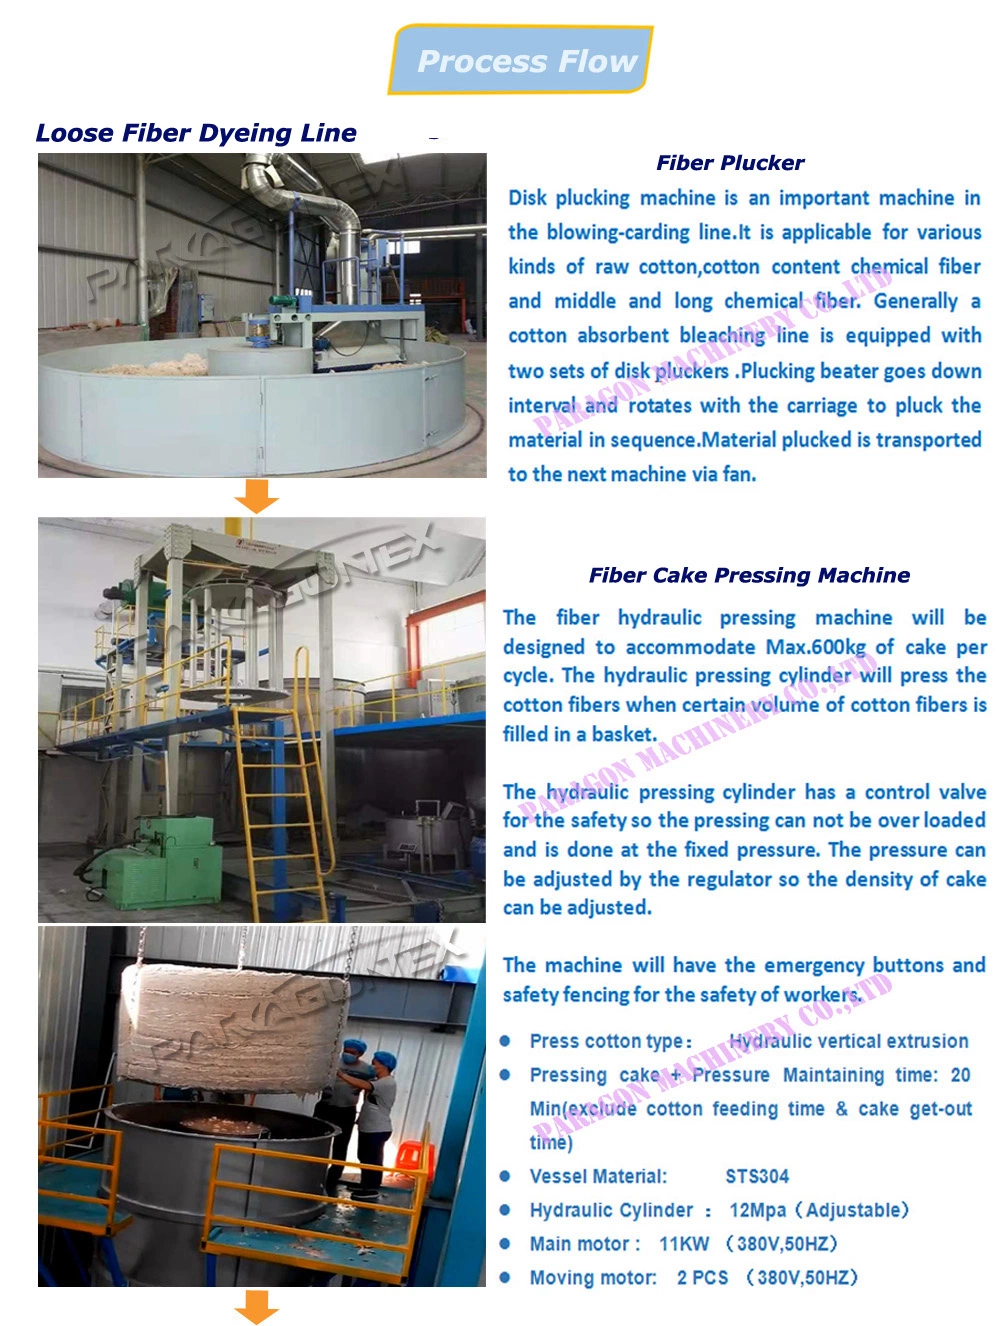 High Capacity Cotton Cake Dewatering/Drying Machine/Dehydrator for Loose Fiber Dyeing Production Line